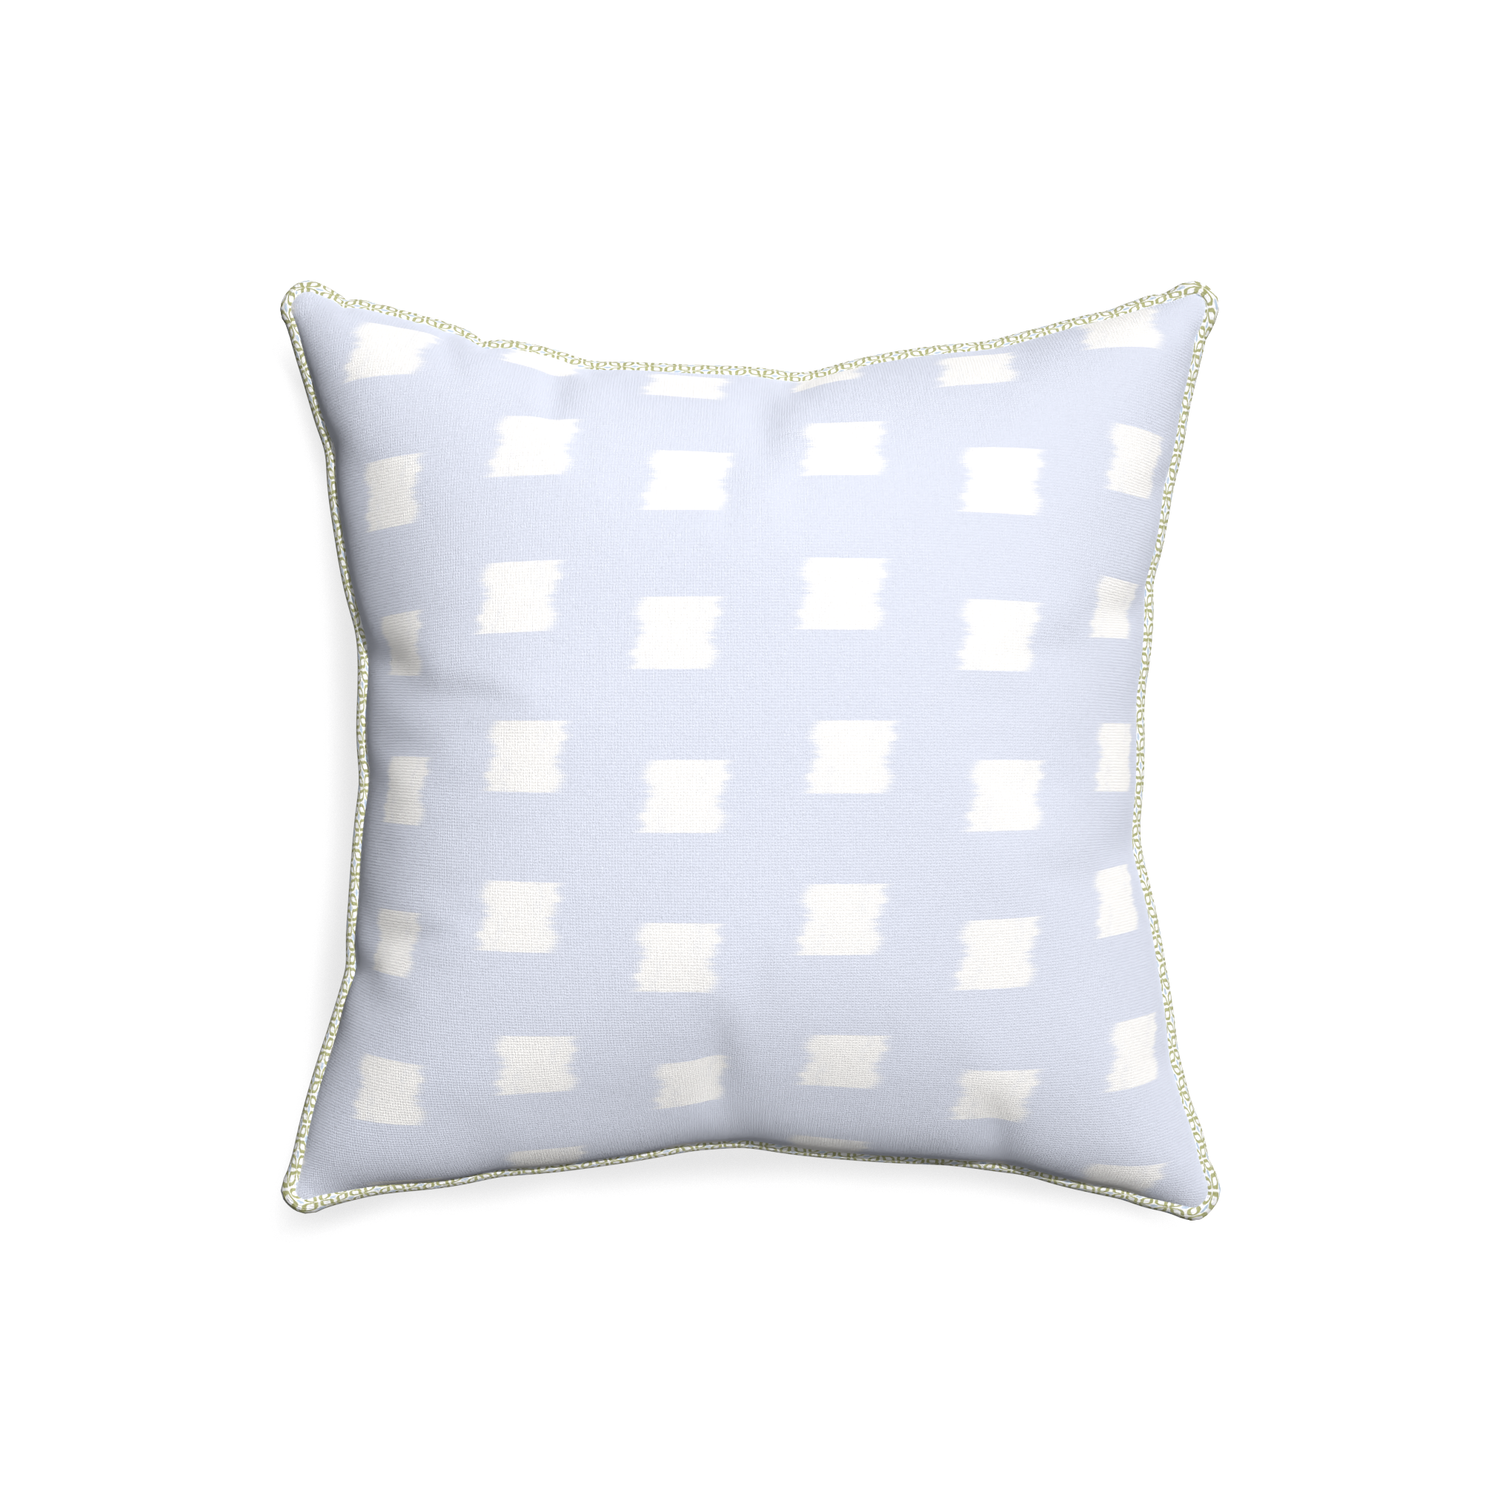 20-square denton custom pillow with l piping on white background